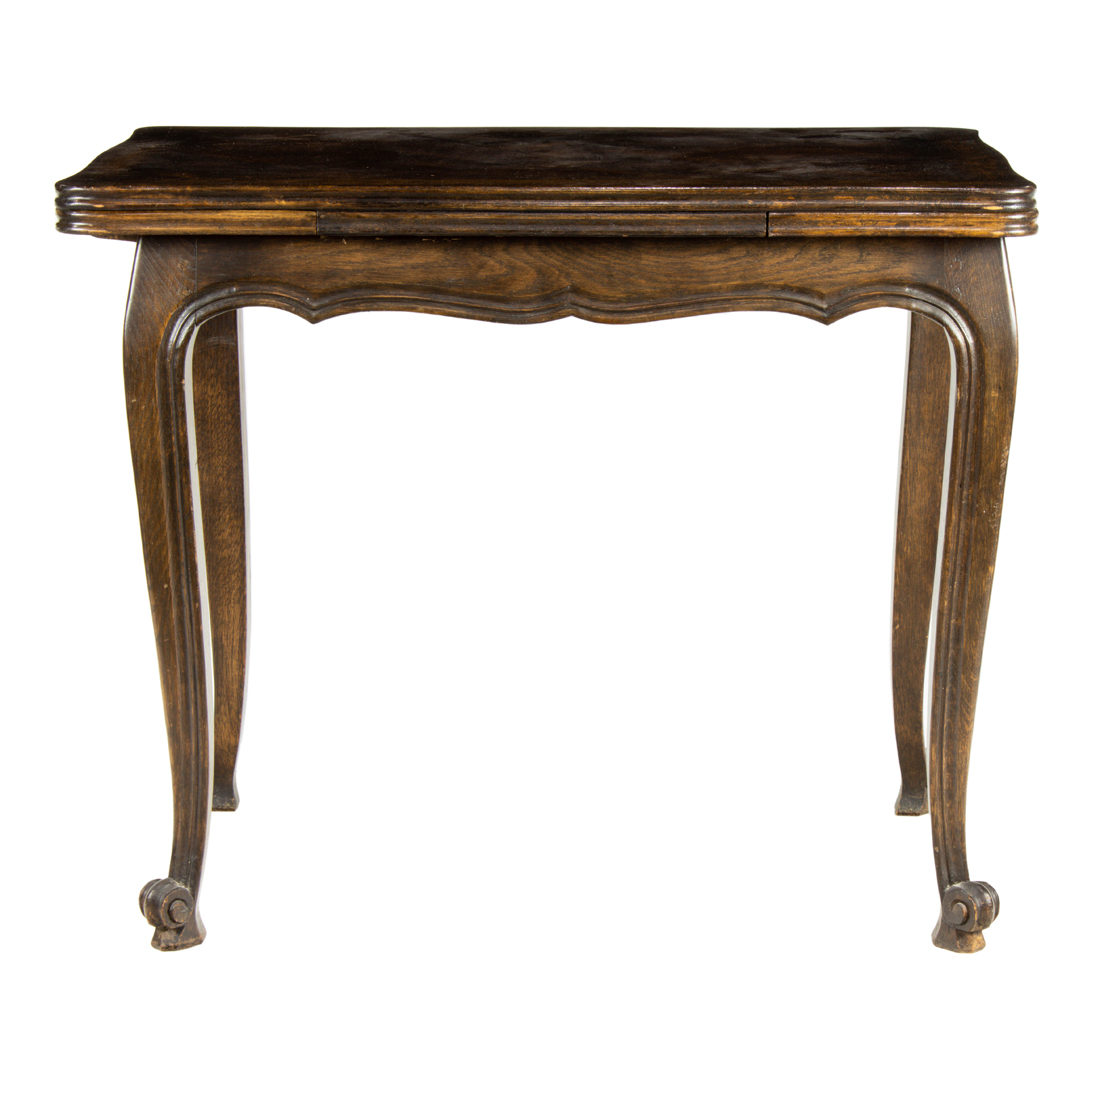 A FRENCH WRITING TABLE 19TH CENTURY